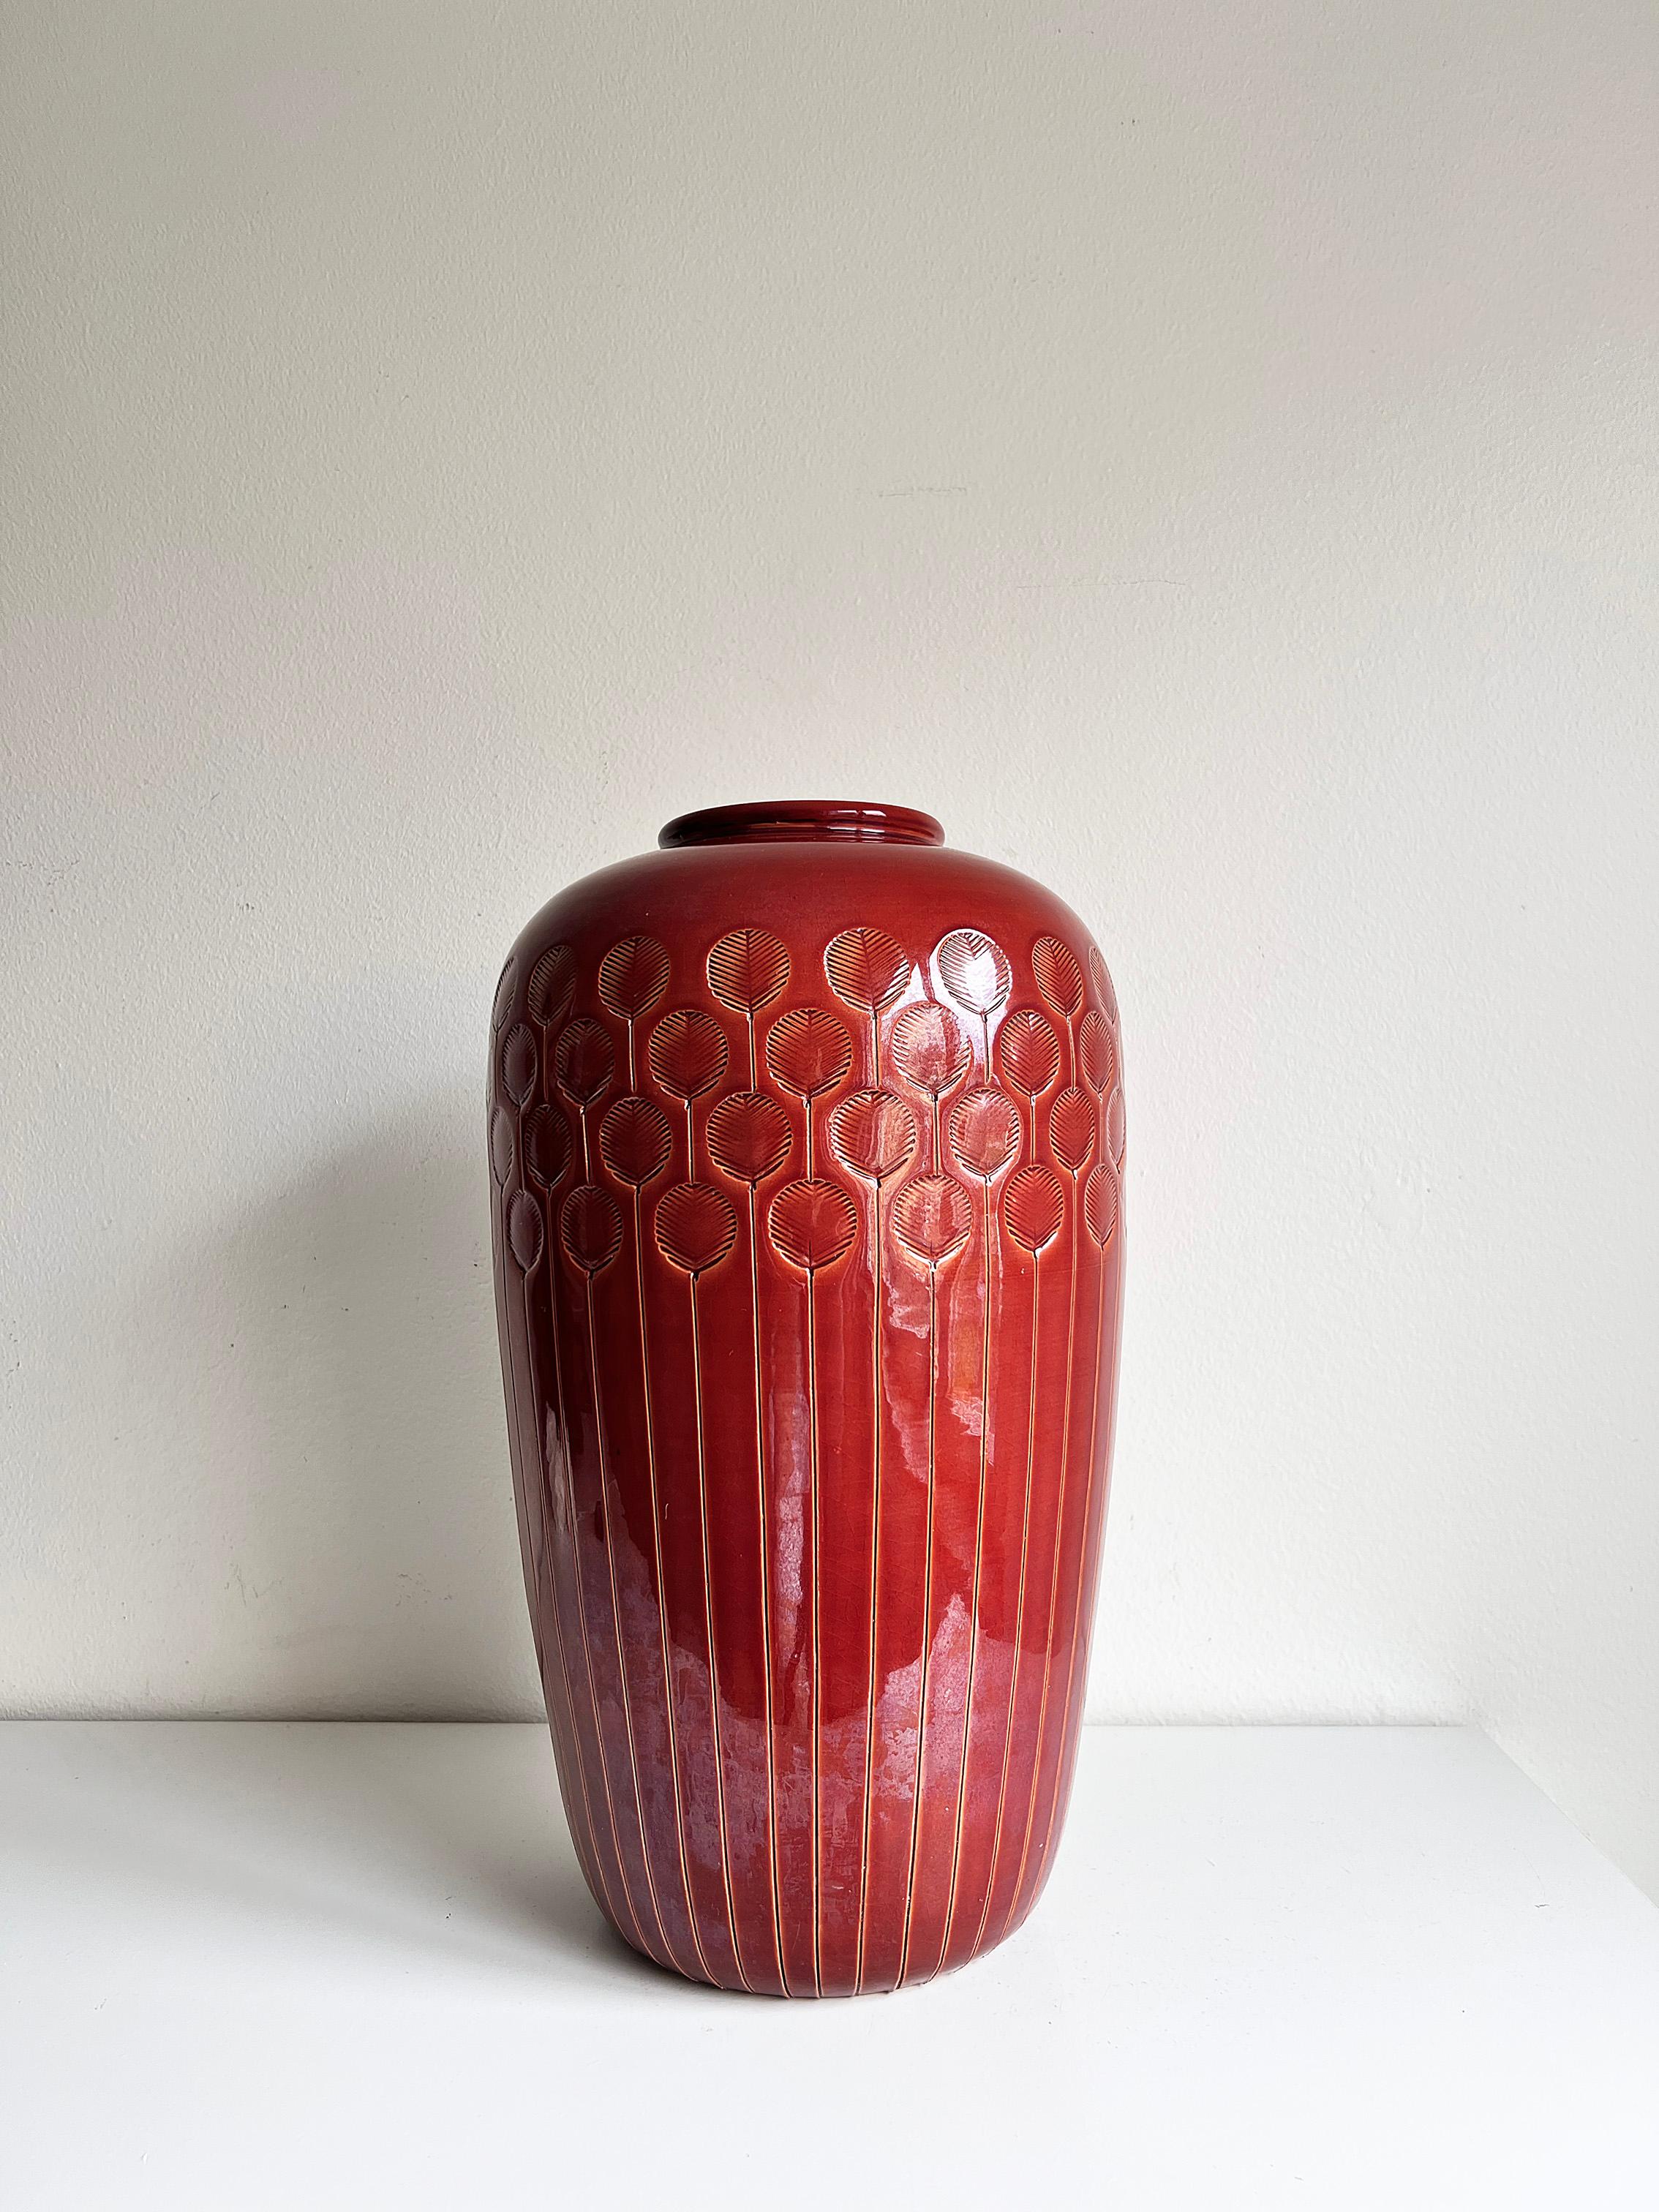 Beautiful italian rust red ceramic floor vase by Flavia/Bitossi, late 1970s. 
In 1976 Bitossi split the company in two segments, where the artistic production got the name Flavia. 
Labeled at the bottom. 

Nice vintage condition, wear and patina